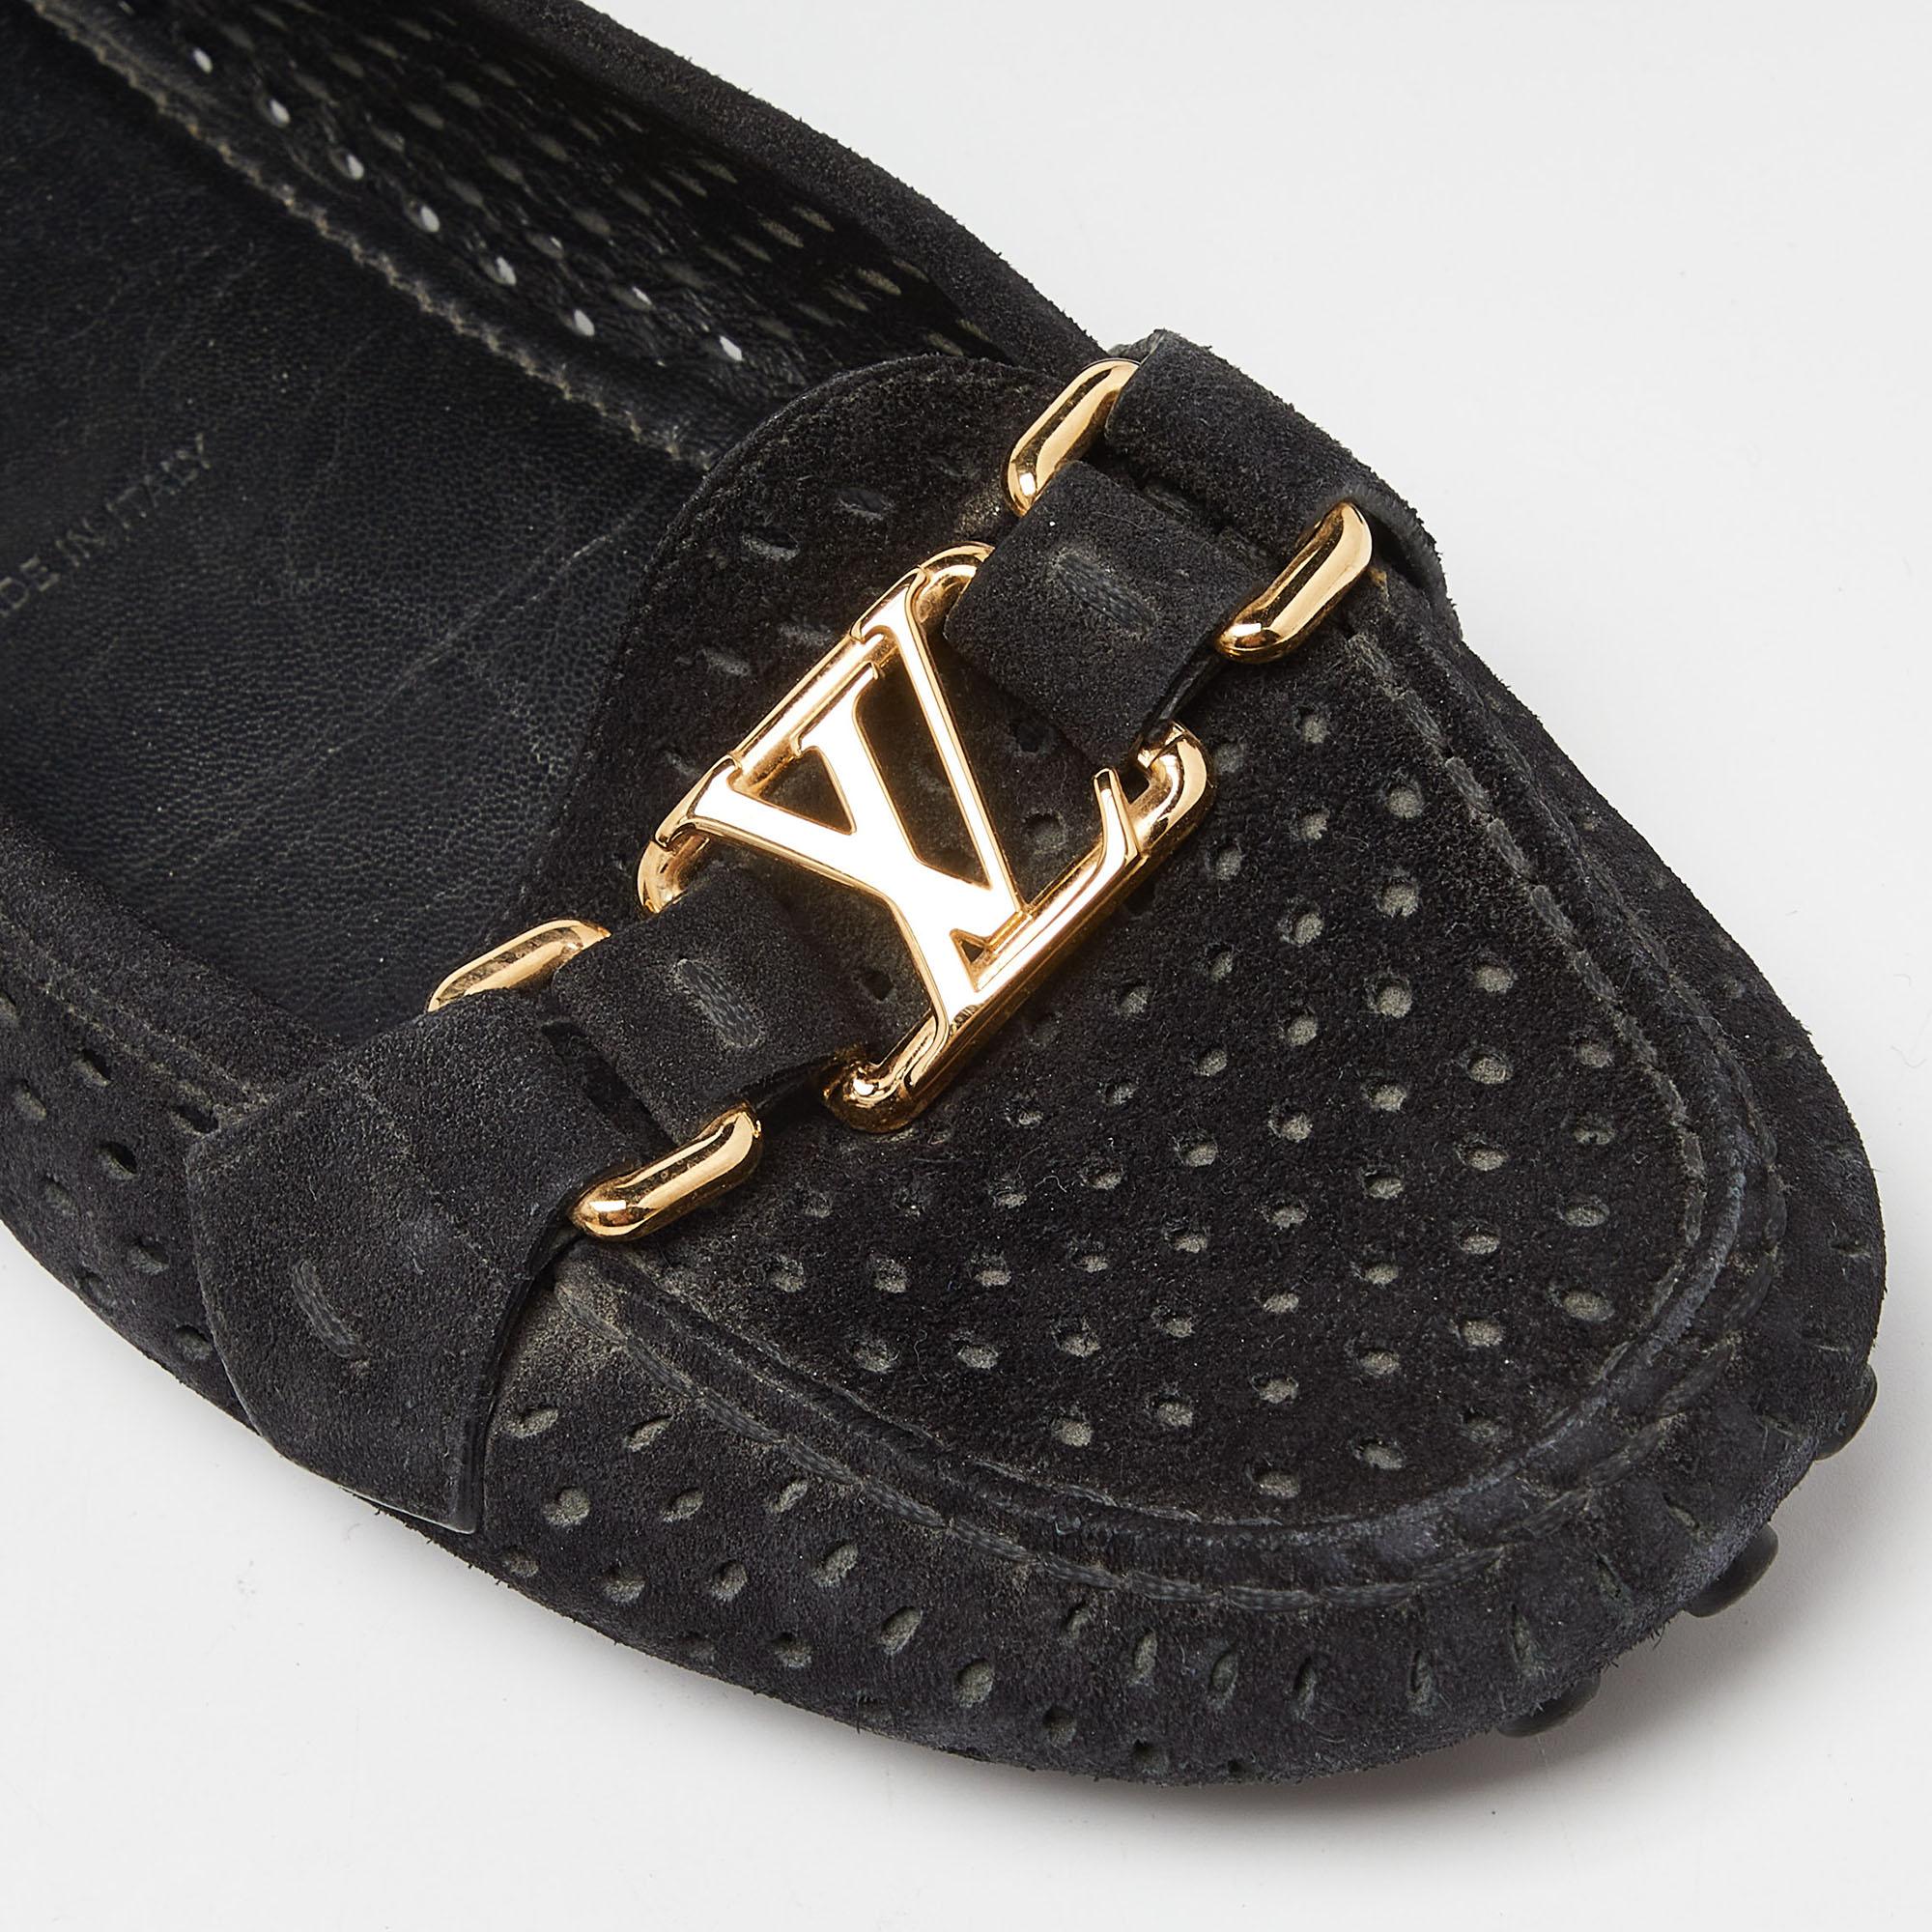 Louis Vuitton Black Leather Oxford Loafers Size 37.5 For Sale 1